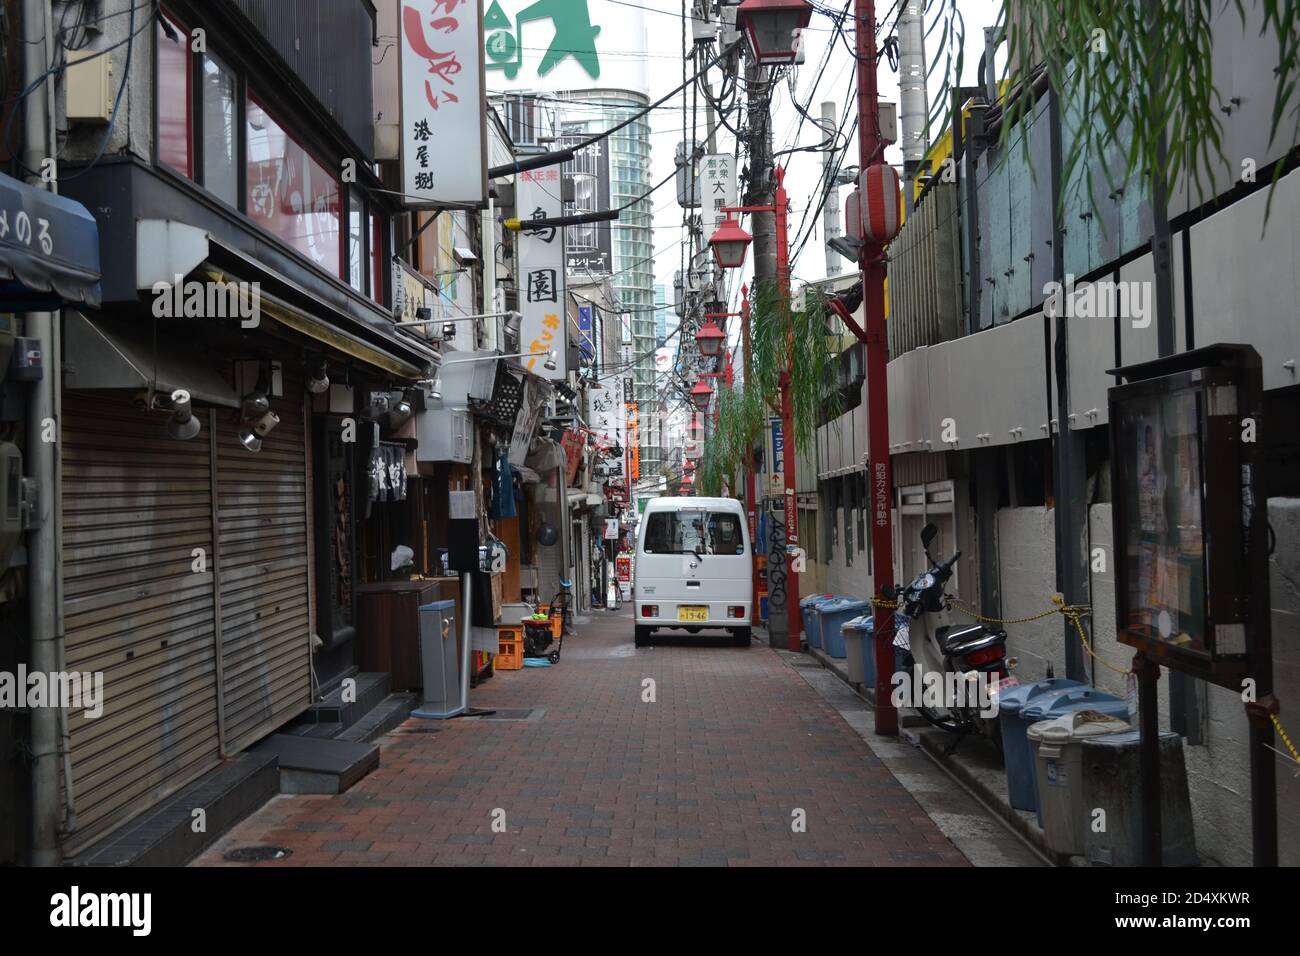 Tokyo, Japan-2/24/16: Small Japanese van drives down a condensed alley in Tokyo with various restaurants, food chains, and shops on the side. Stock Photo